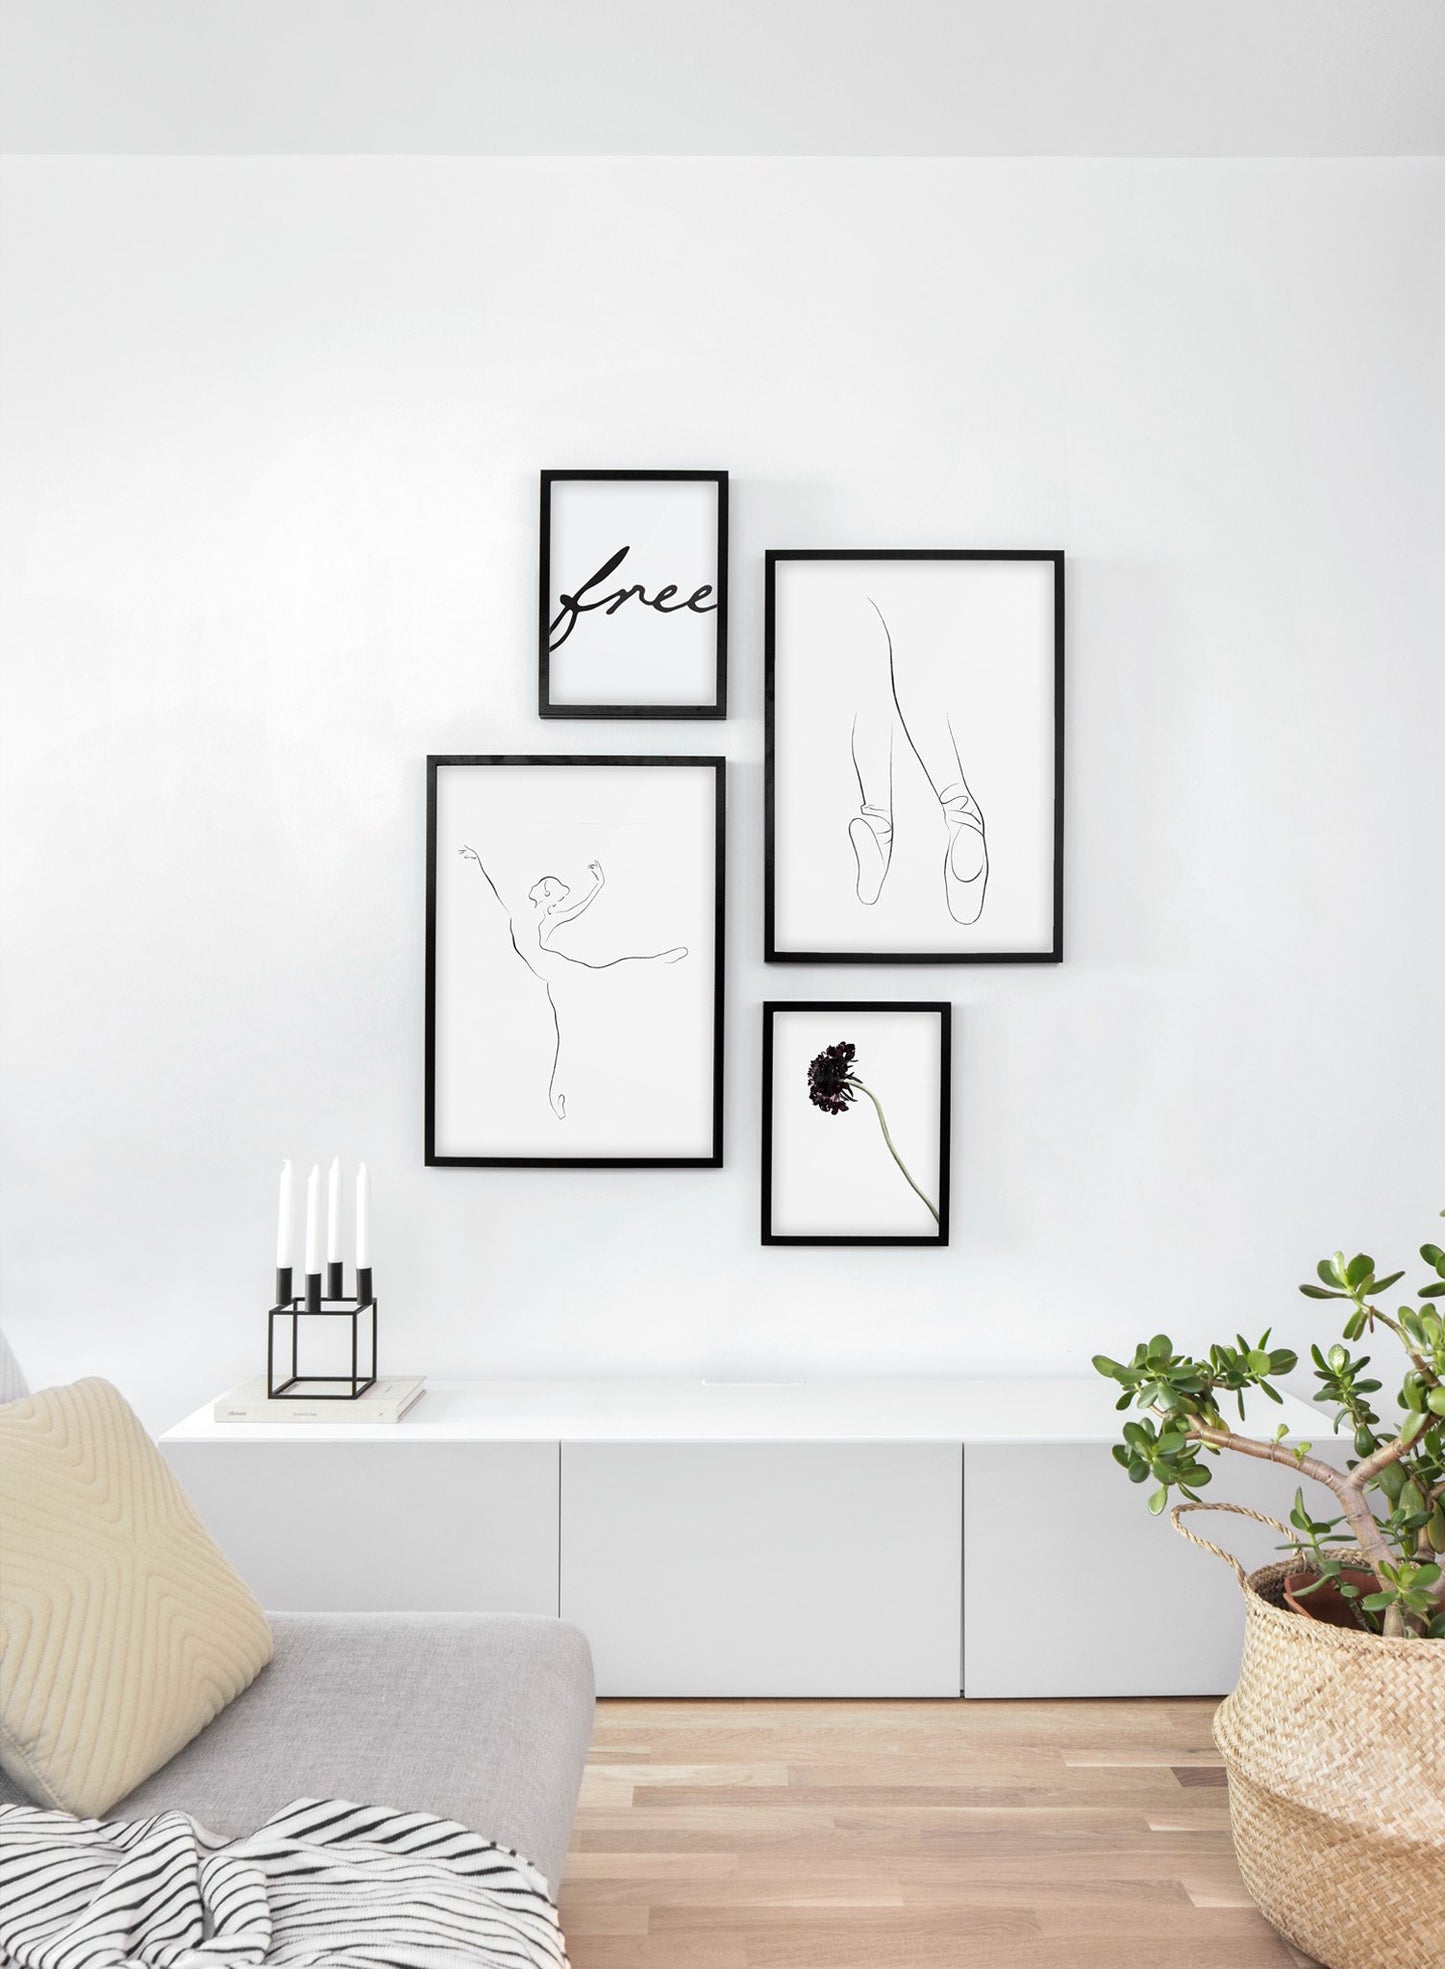 Modern minimalist poster by Opposite Wall with abstract illustration of Pointe - Gallery wall quatro - Living room